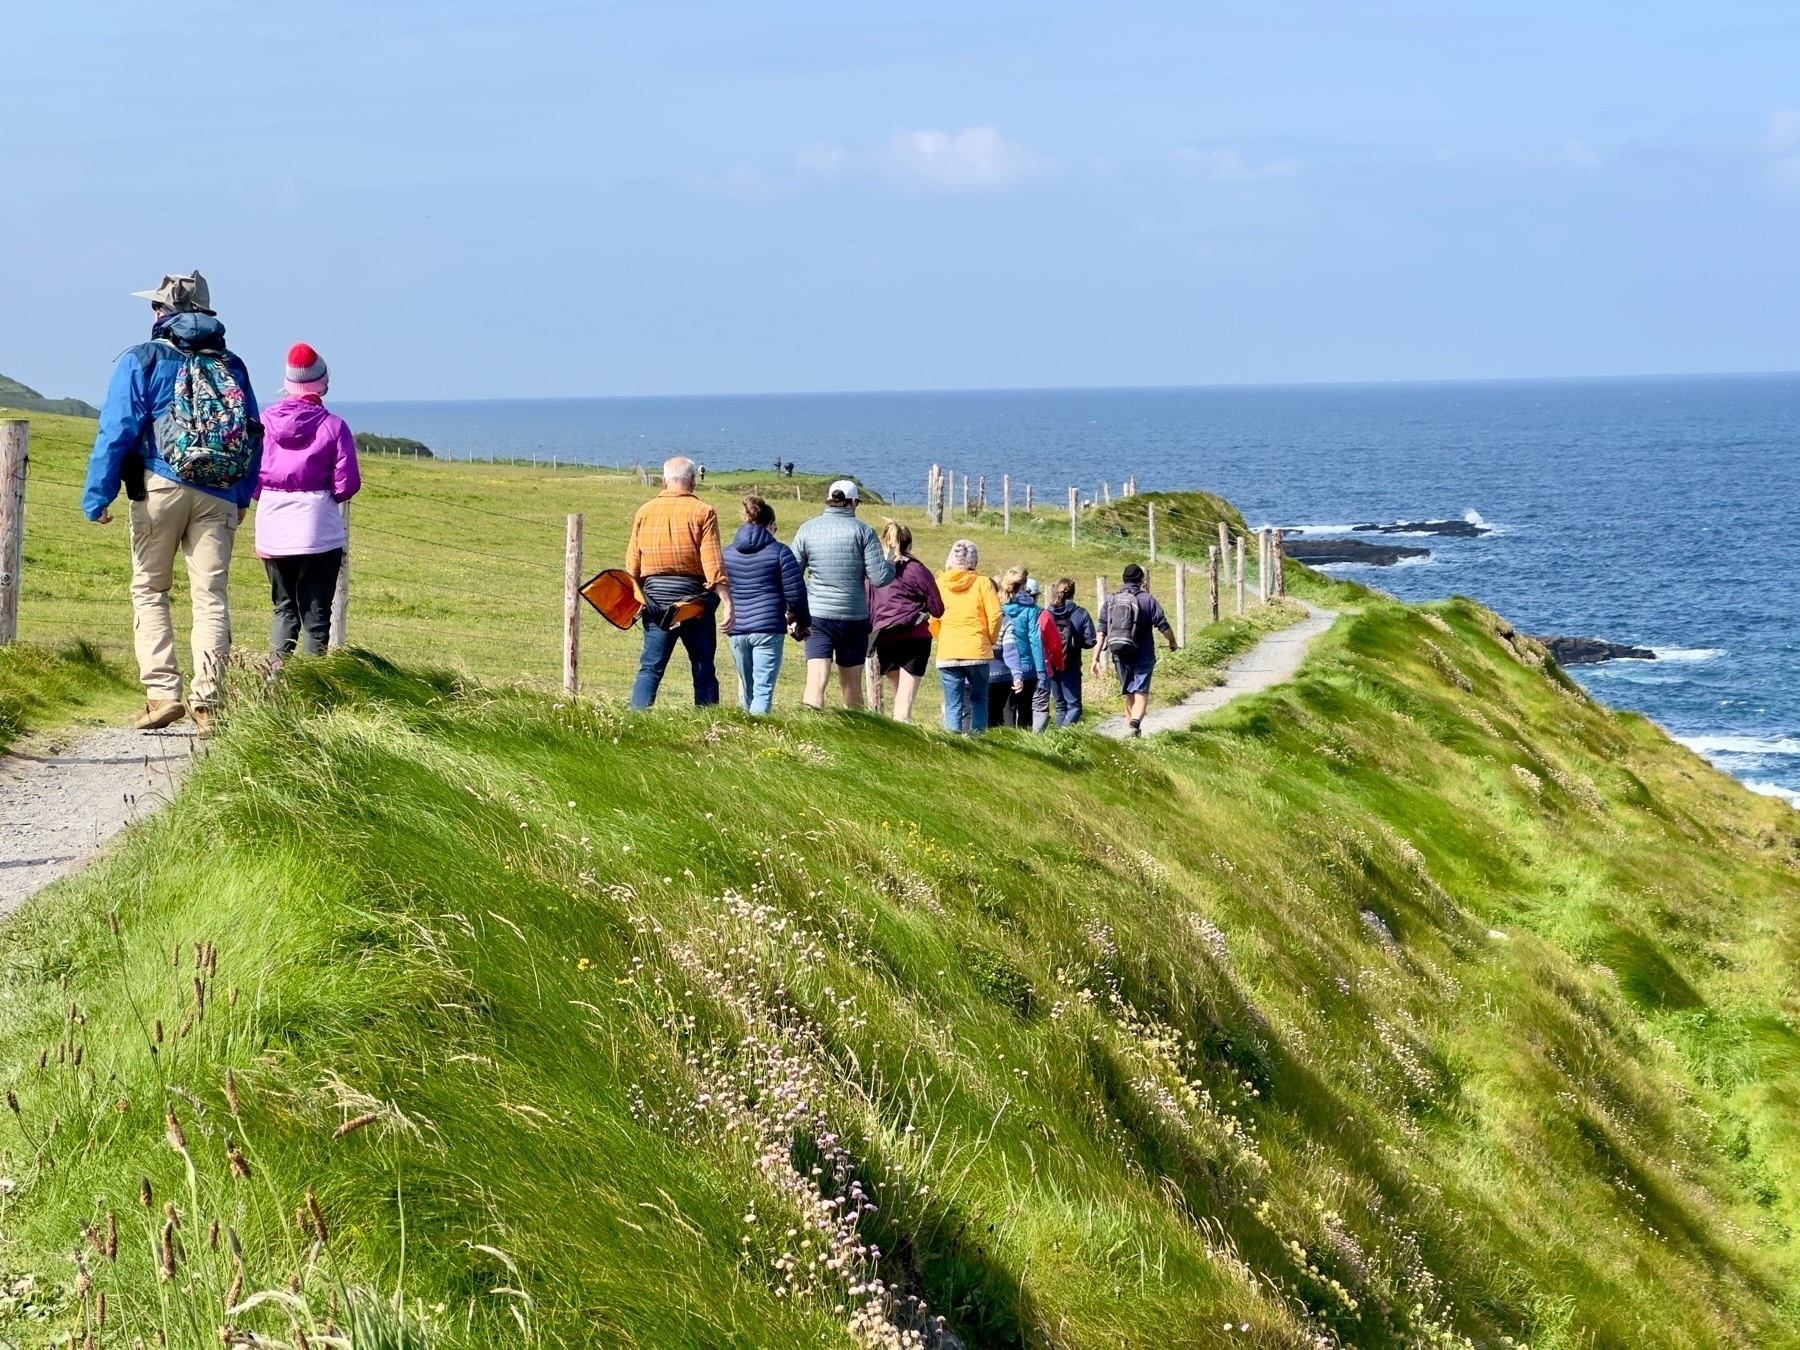 Auto-generated description: A group of people is walking along a grassy coastal path with the sea and blue sky in the background.